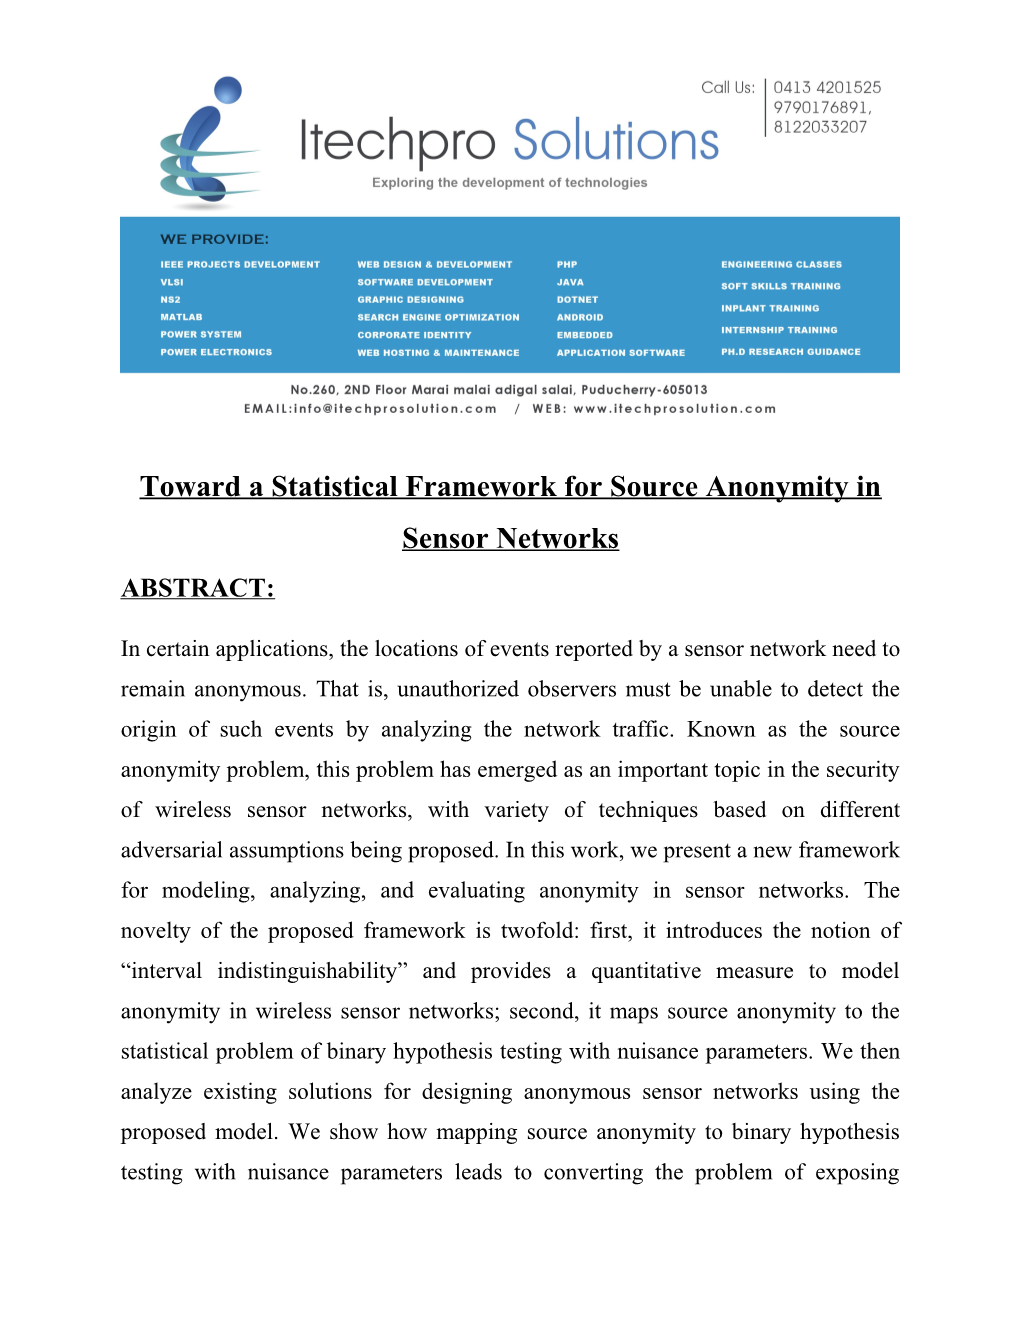 Toward a Statistical Framework for Source Anonymity in Sensor Networks